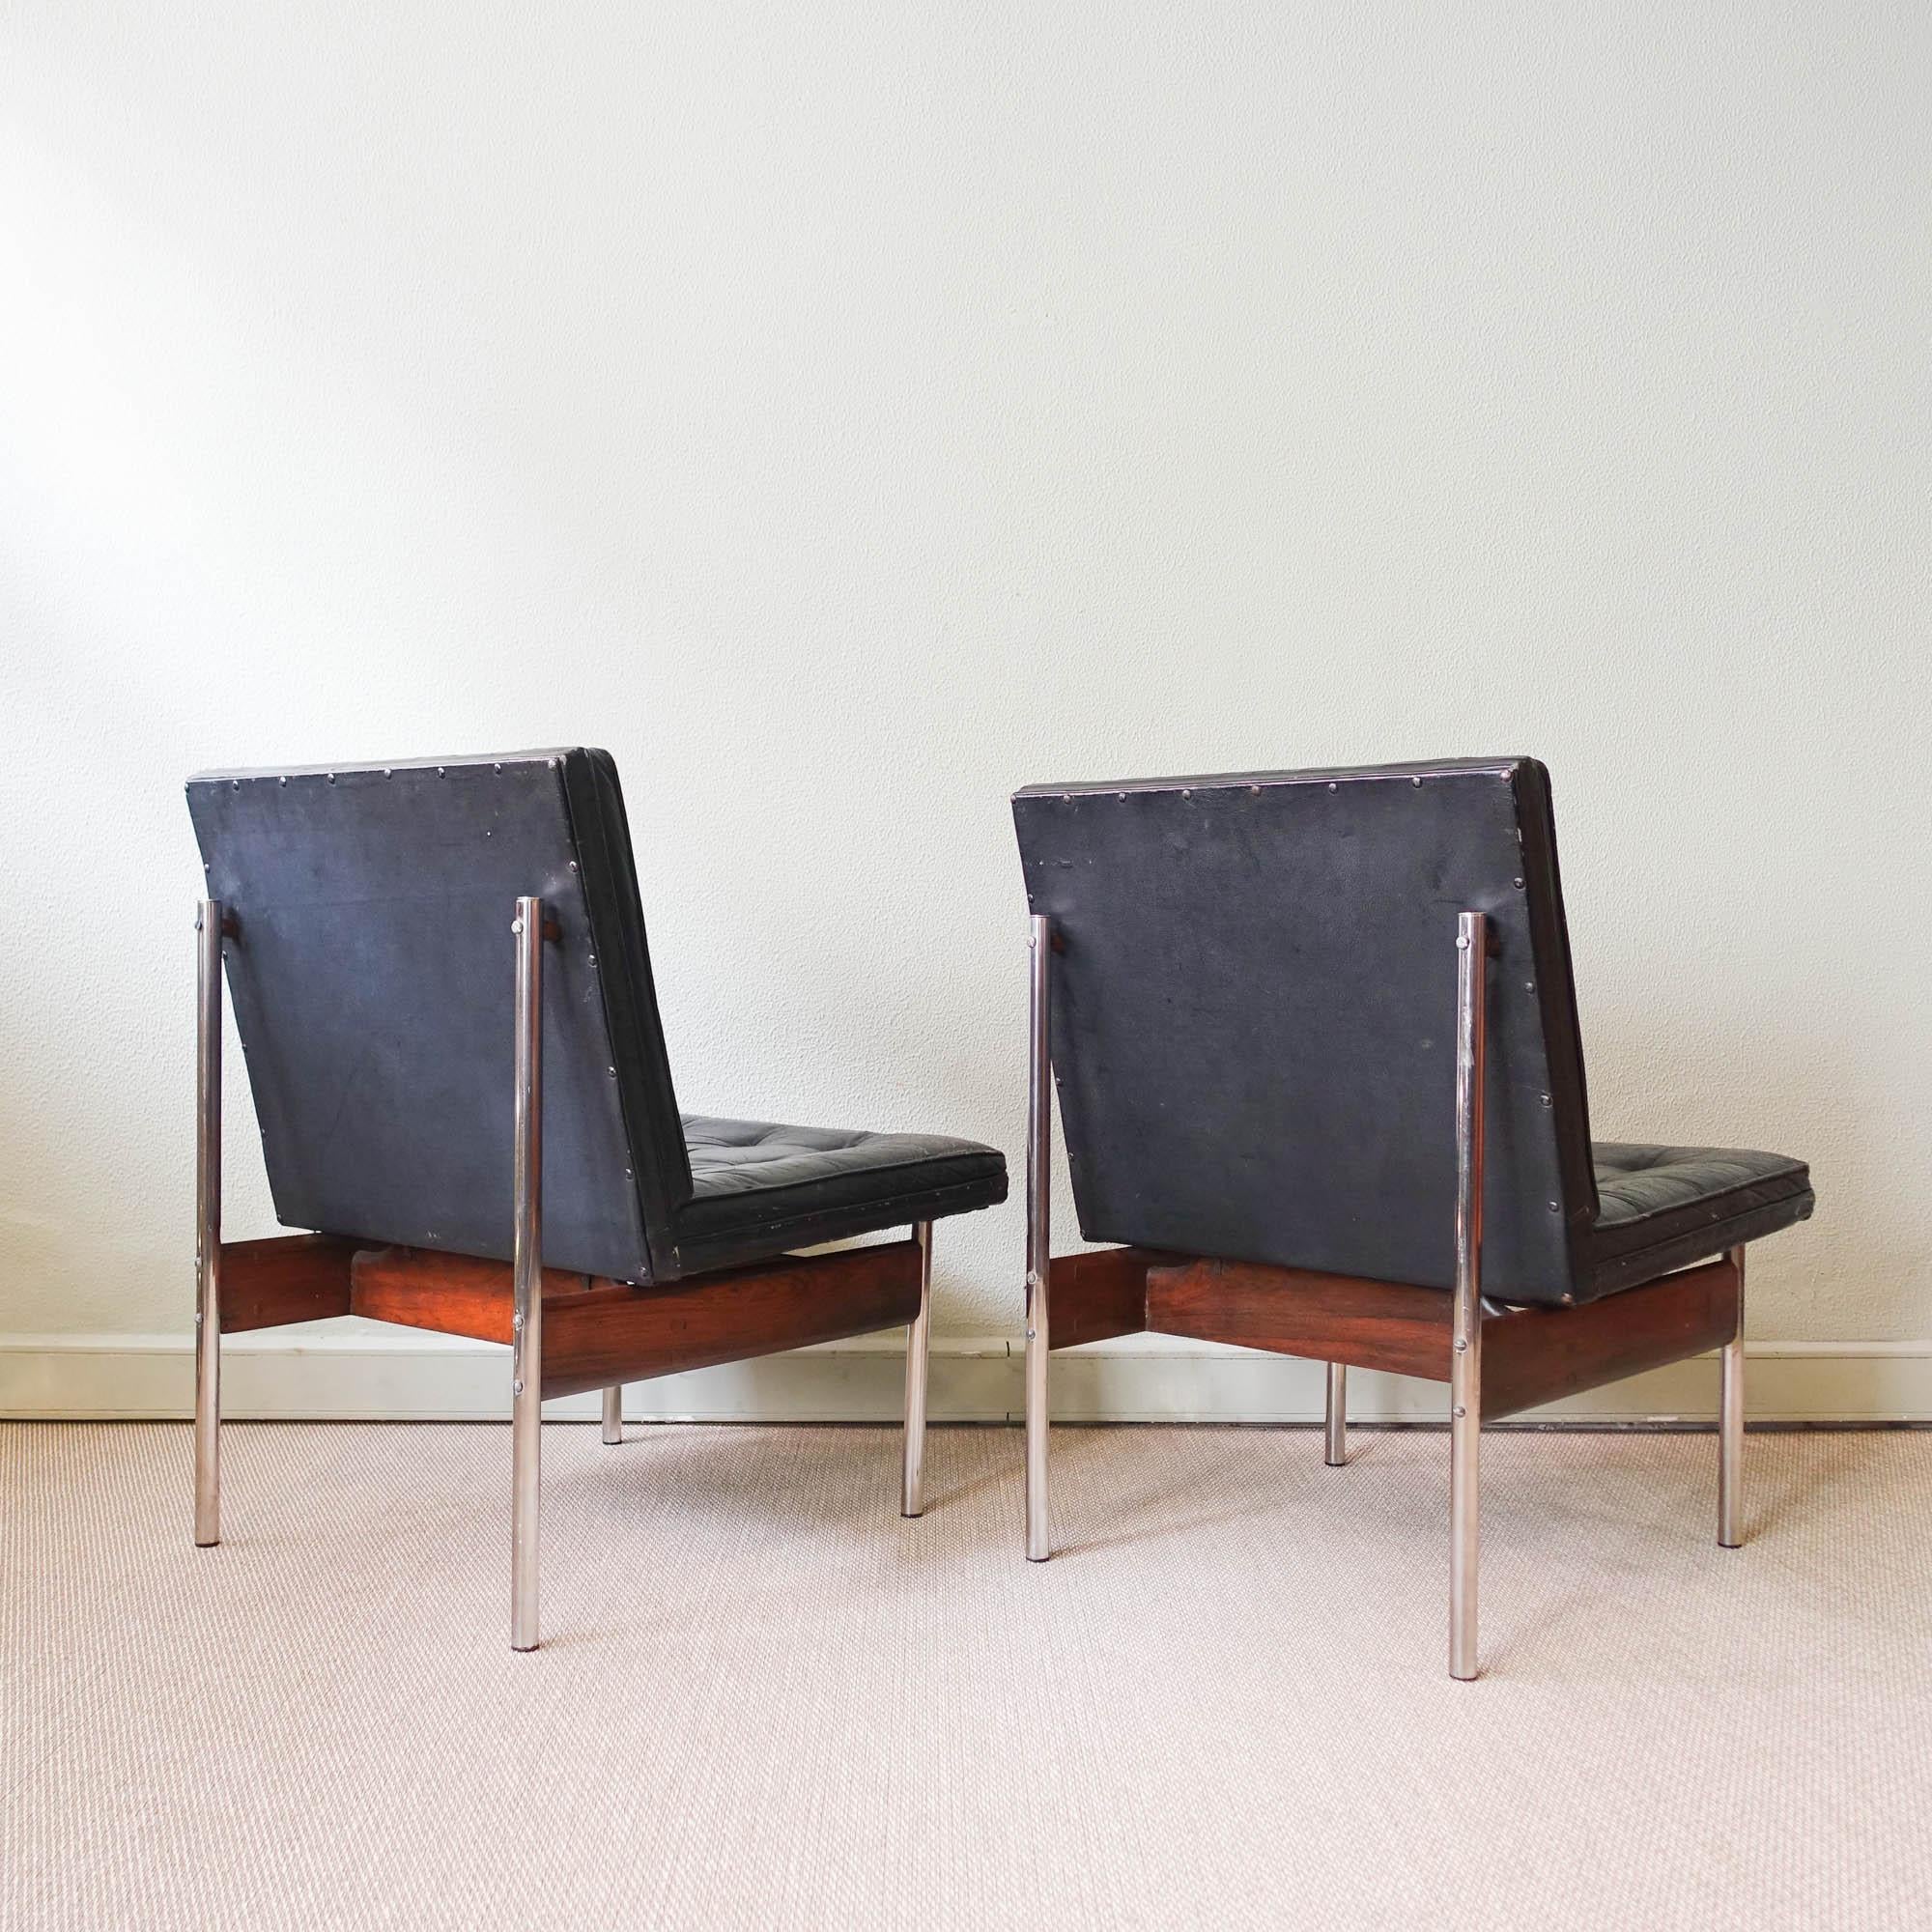 Late 20th Century Pair of Lounge Chairs by Móveis Cimo, 1970's For Sale